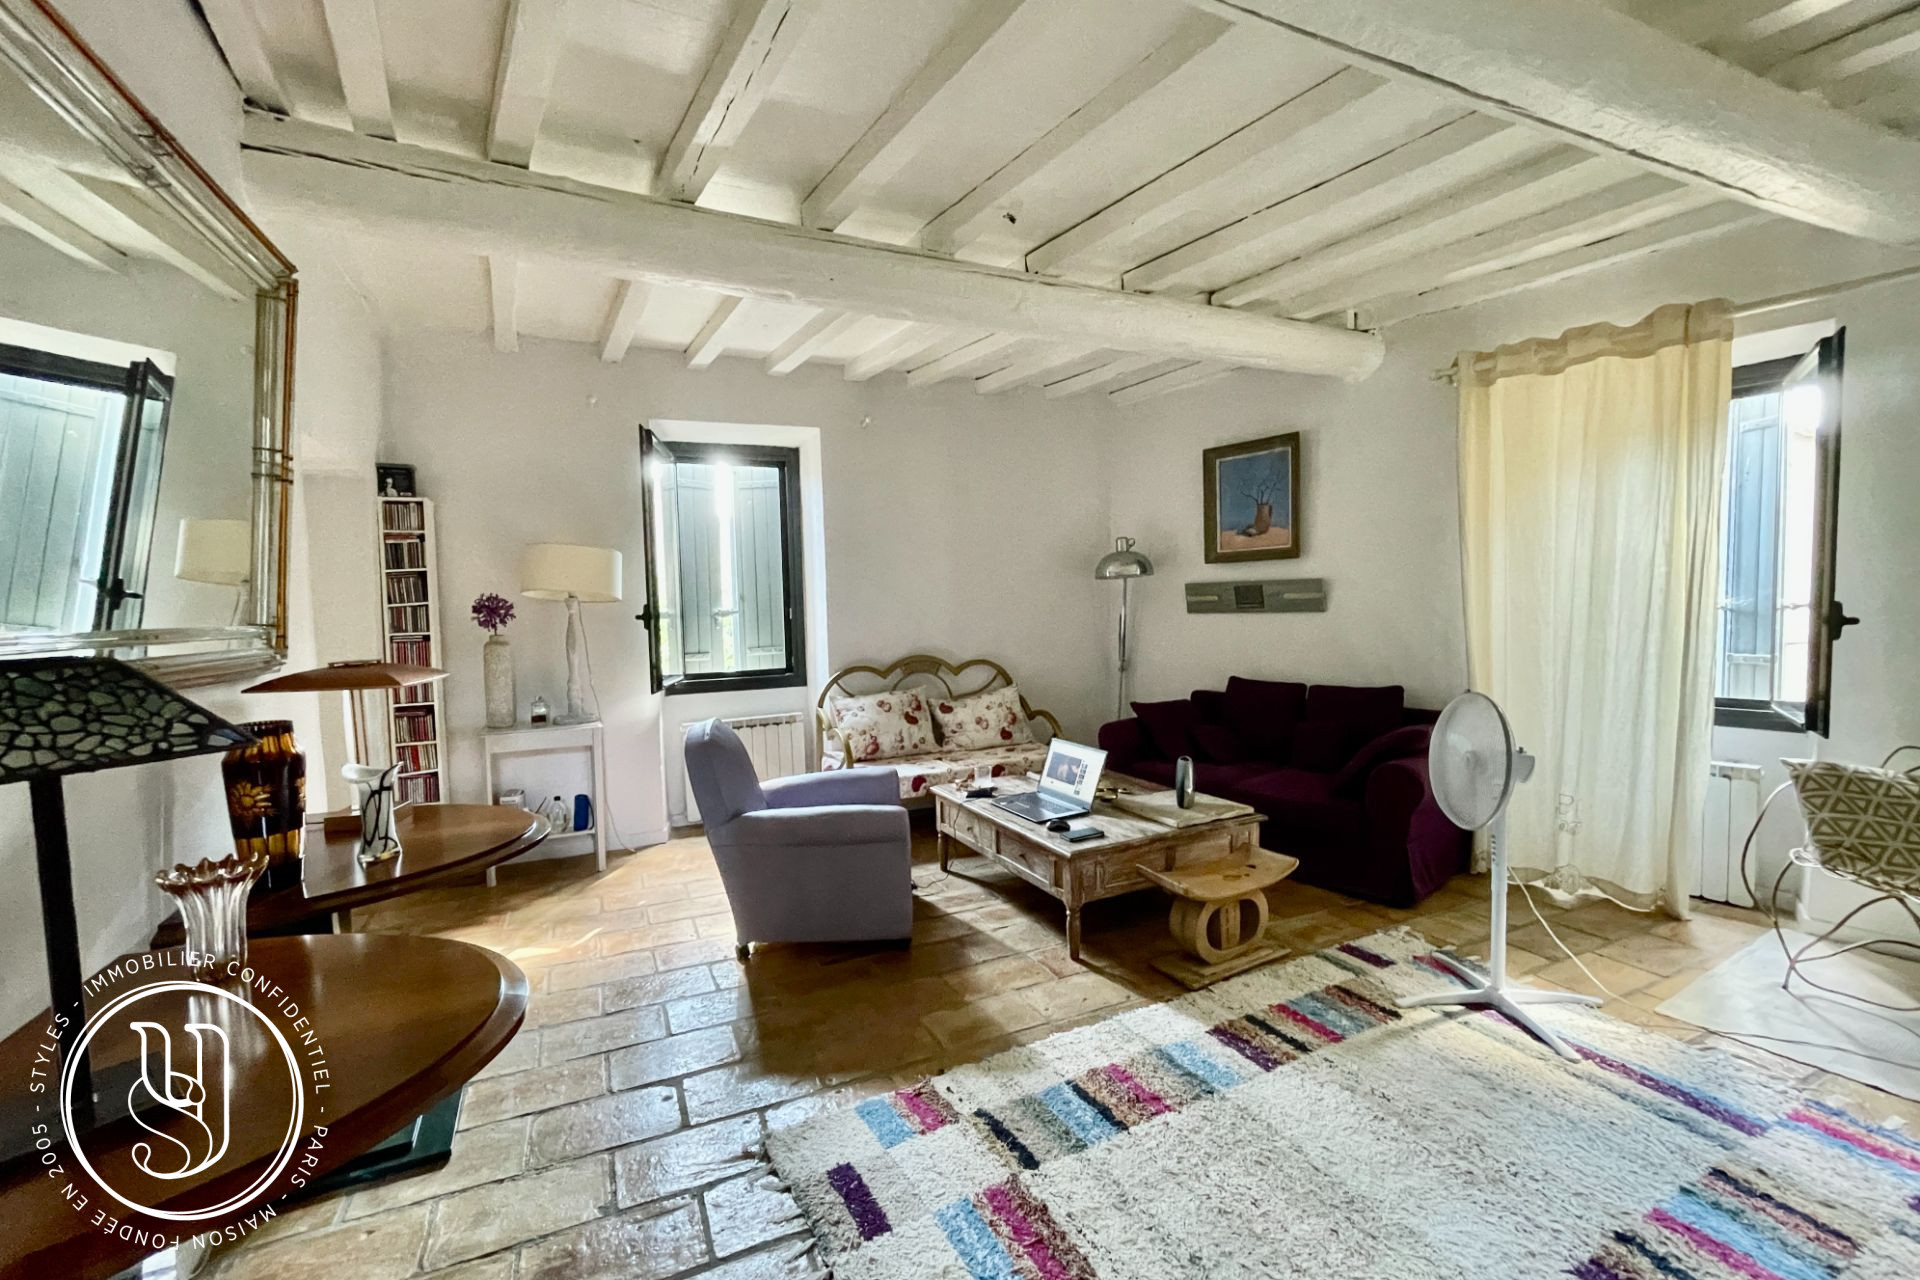 Uzès - surroundings - A charming house in a village with amenities - image 5